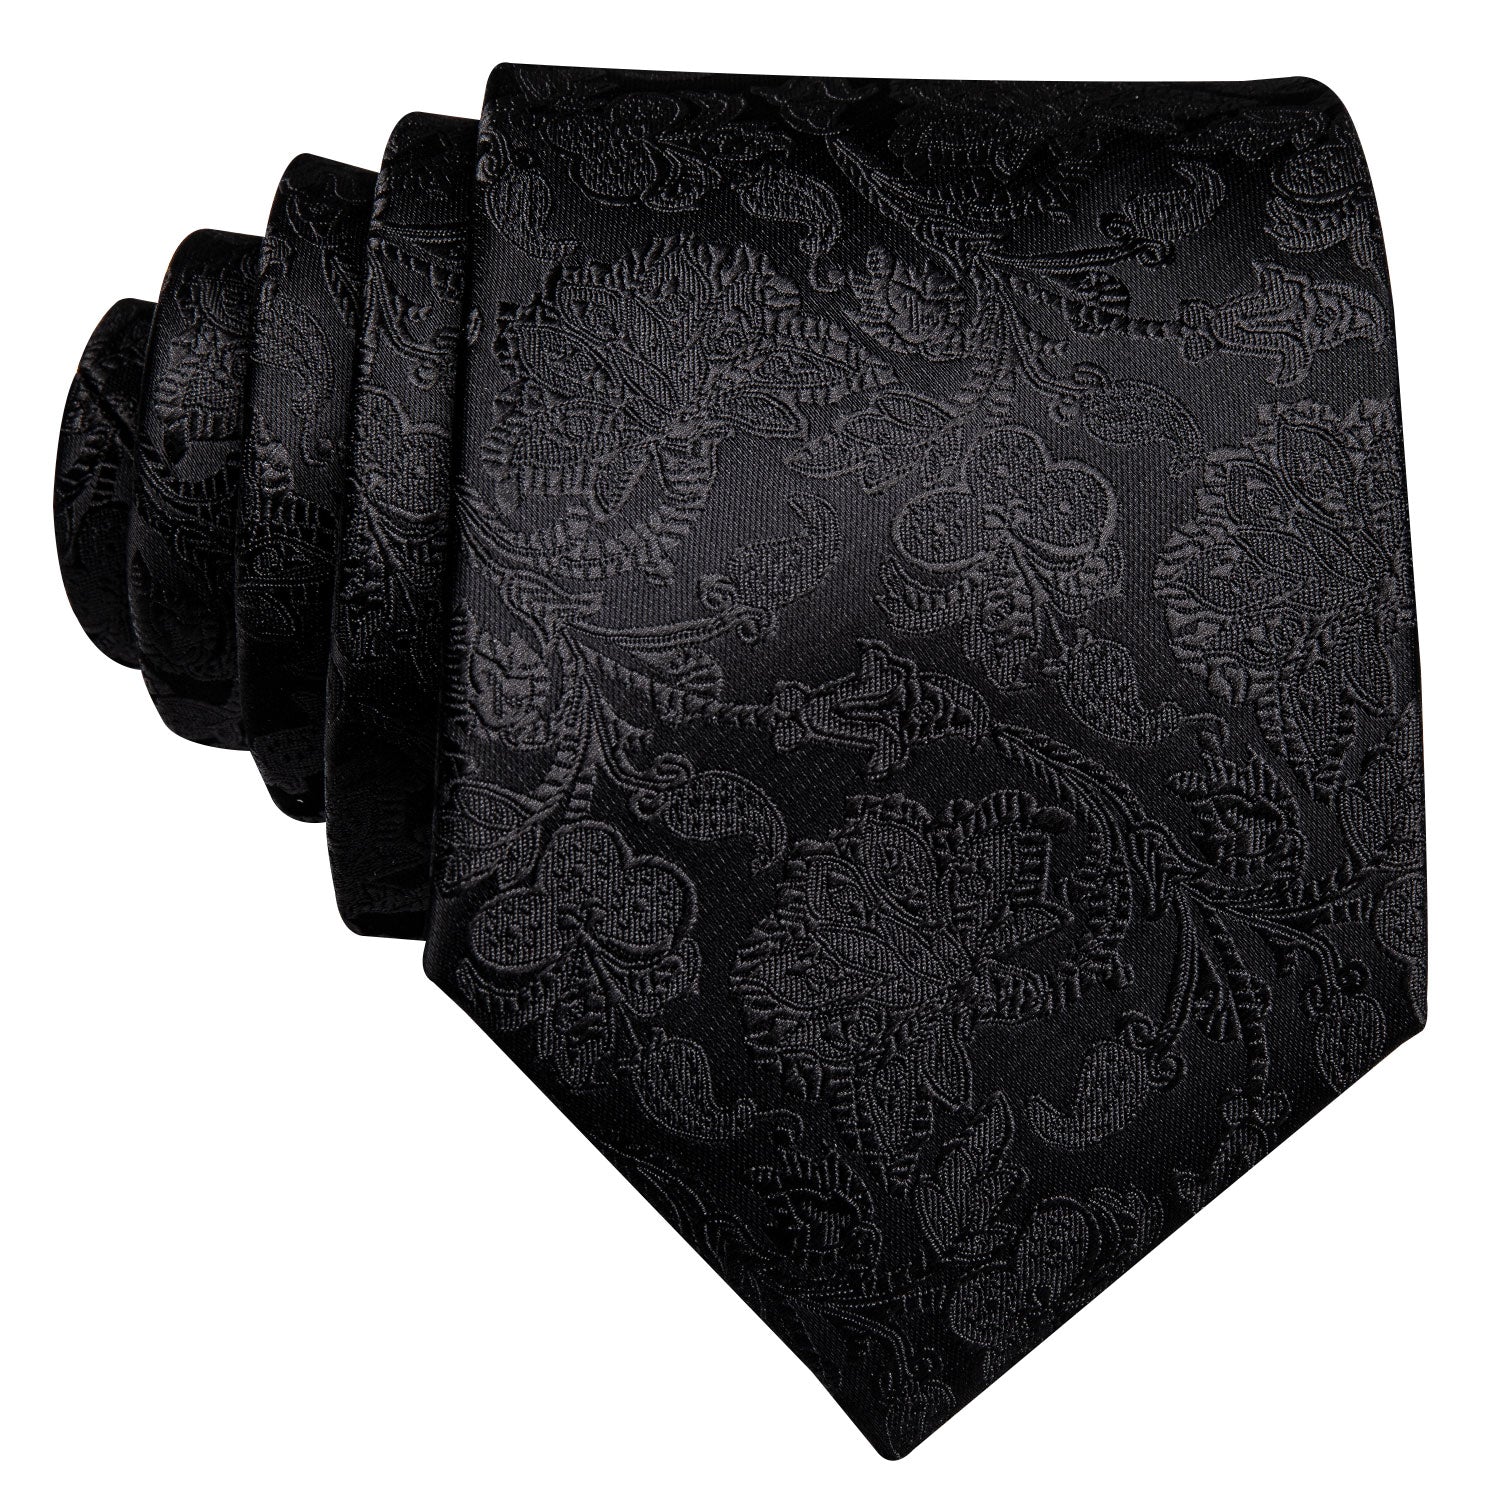 Black Paisley Men's Tie Alloy Lapel Pin Brooch Silk 63 Inches Tie Pocket Square Cufflinks Set Wedding Business Party